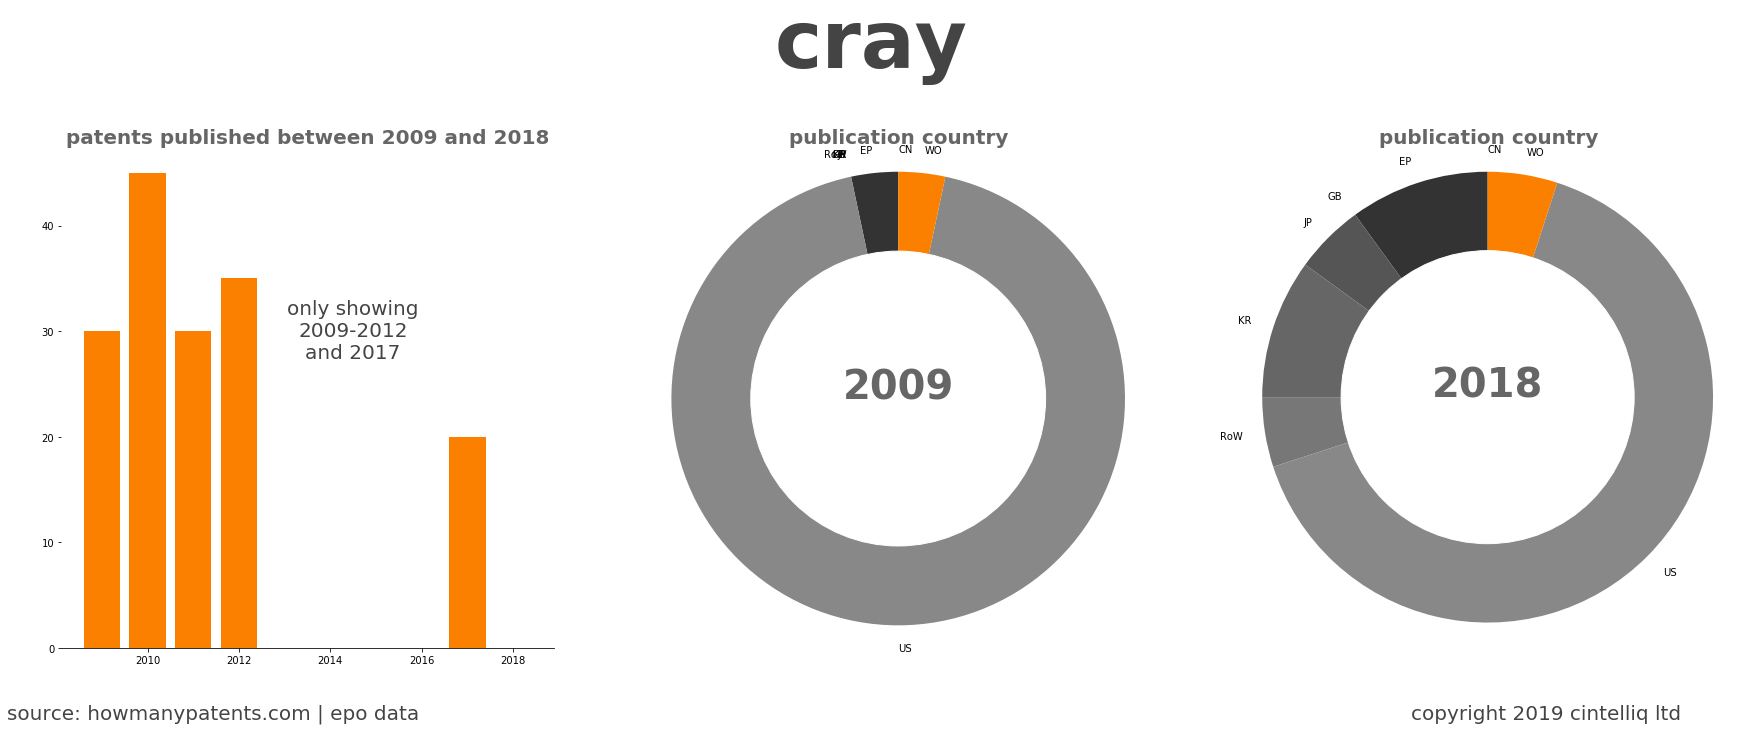 summary of patents for Cray